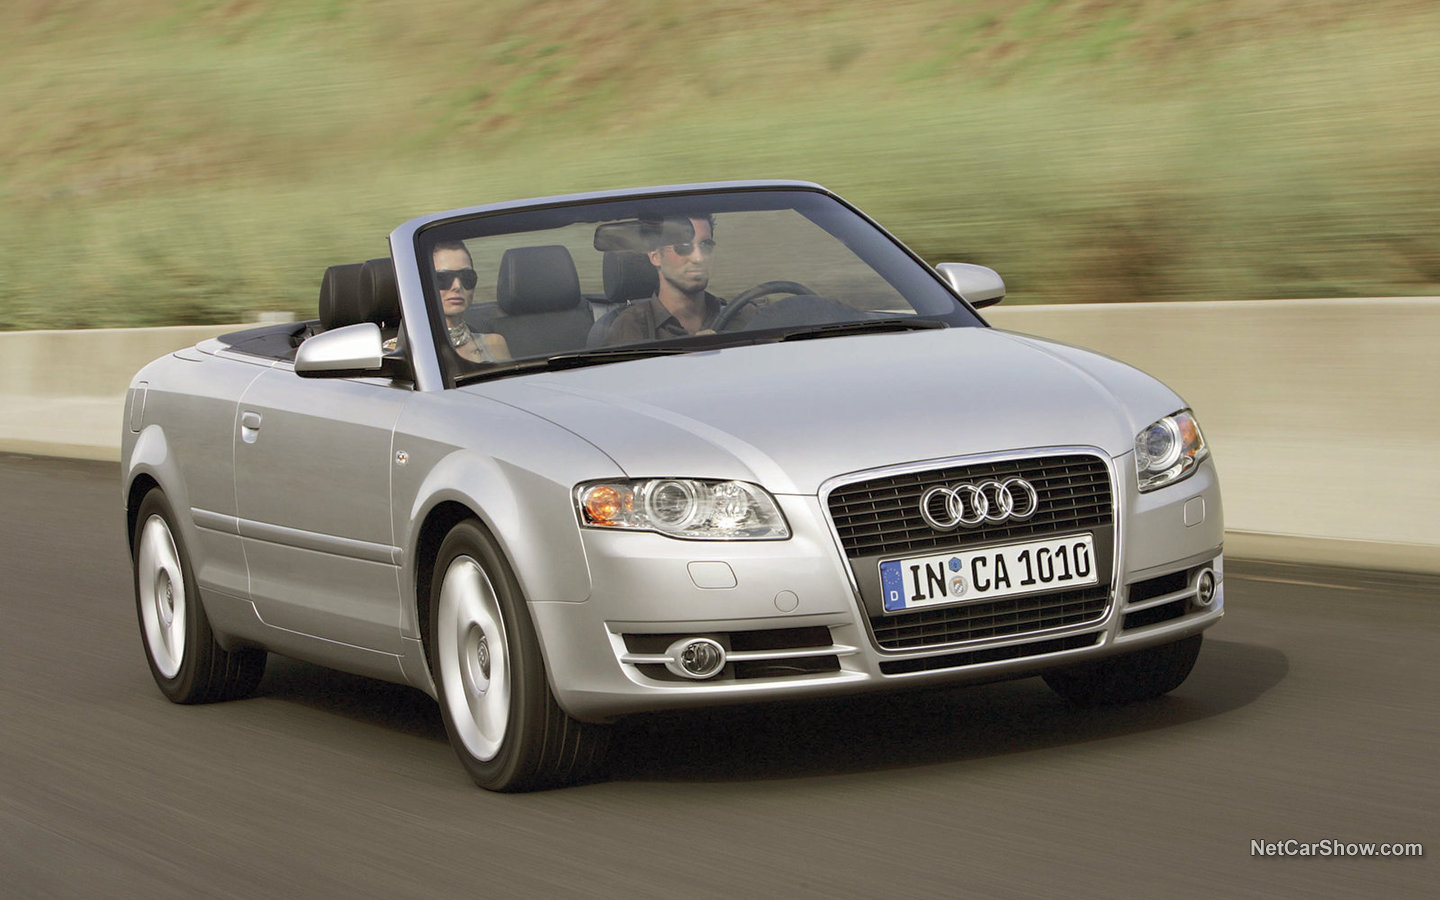 Audi A4 Cabriolet 2006 348fbb34